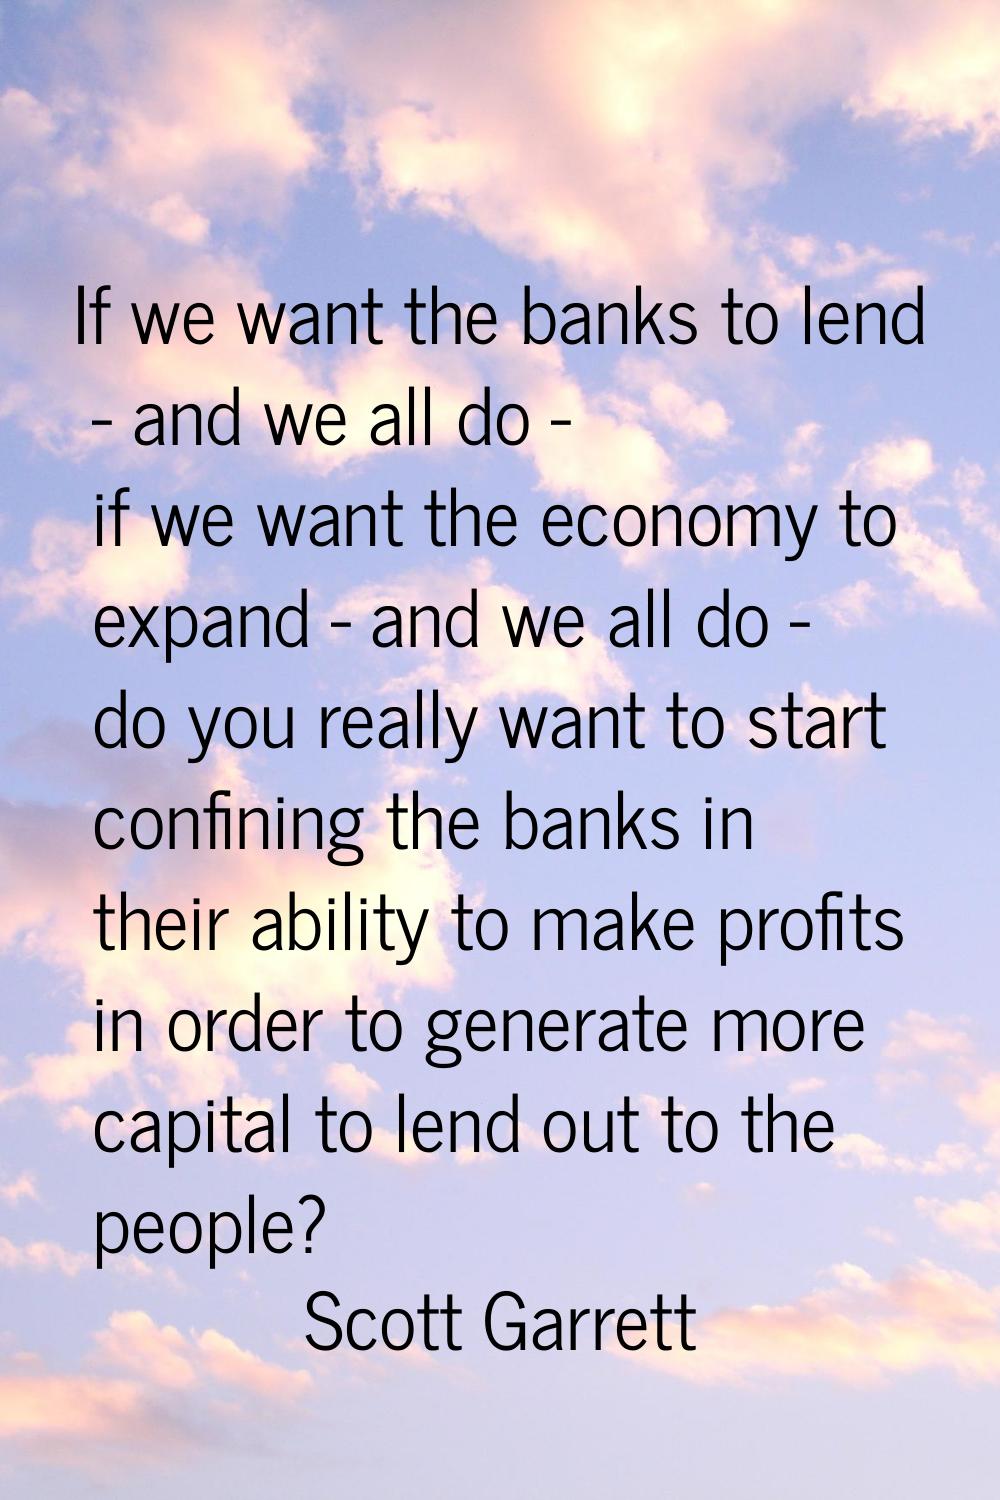 If we want the banks to lend - and we all do - if we want the economy to expand - and we all do - d